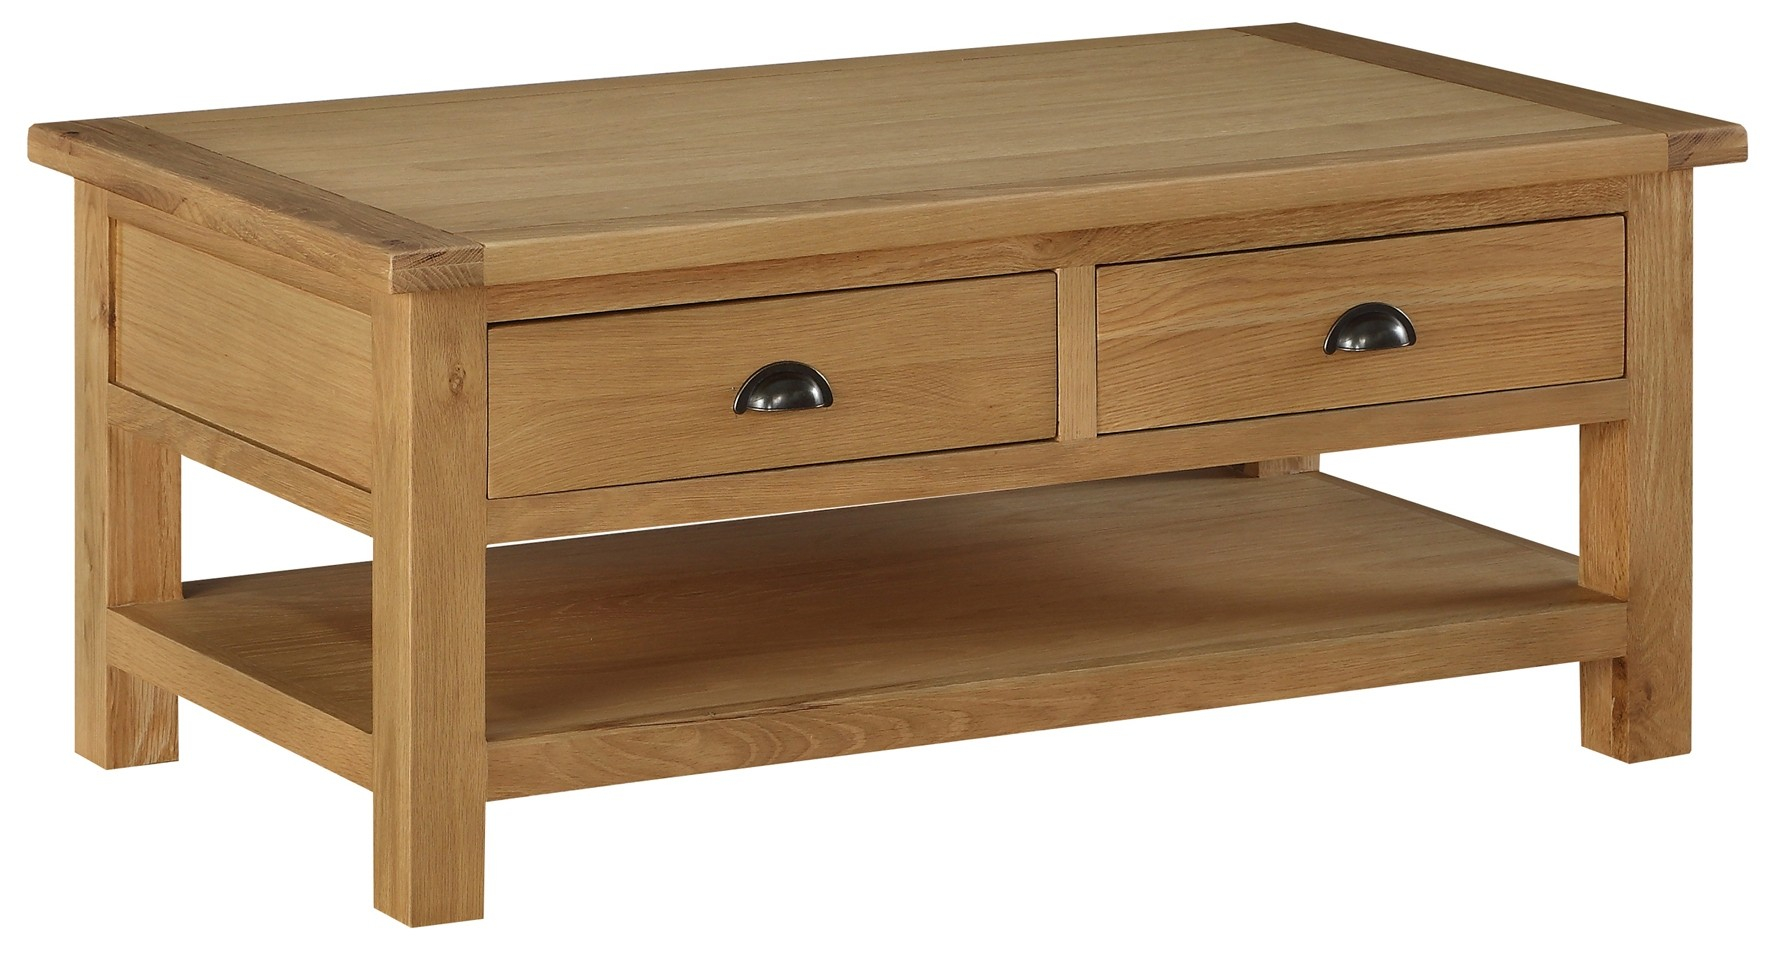 Sweet Dreams Kielder Solid Oak Coffee Table With 2 Drawers From The intended for dimensions 1772 X 955